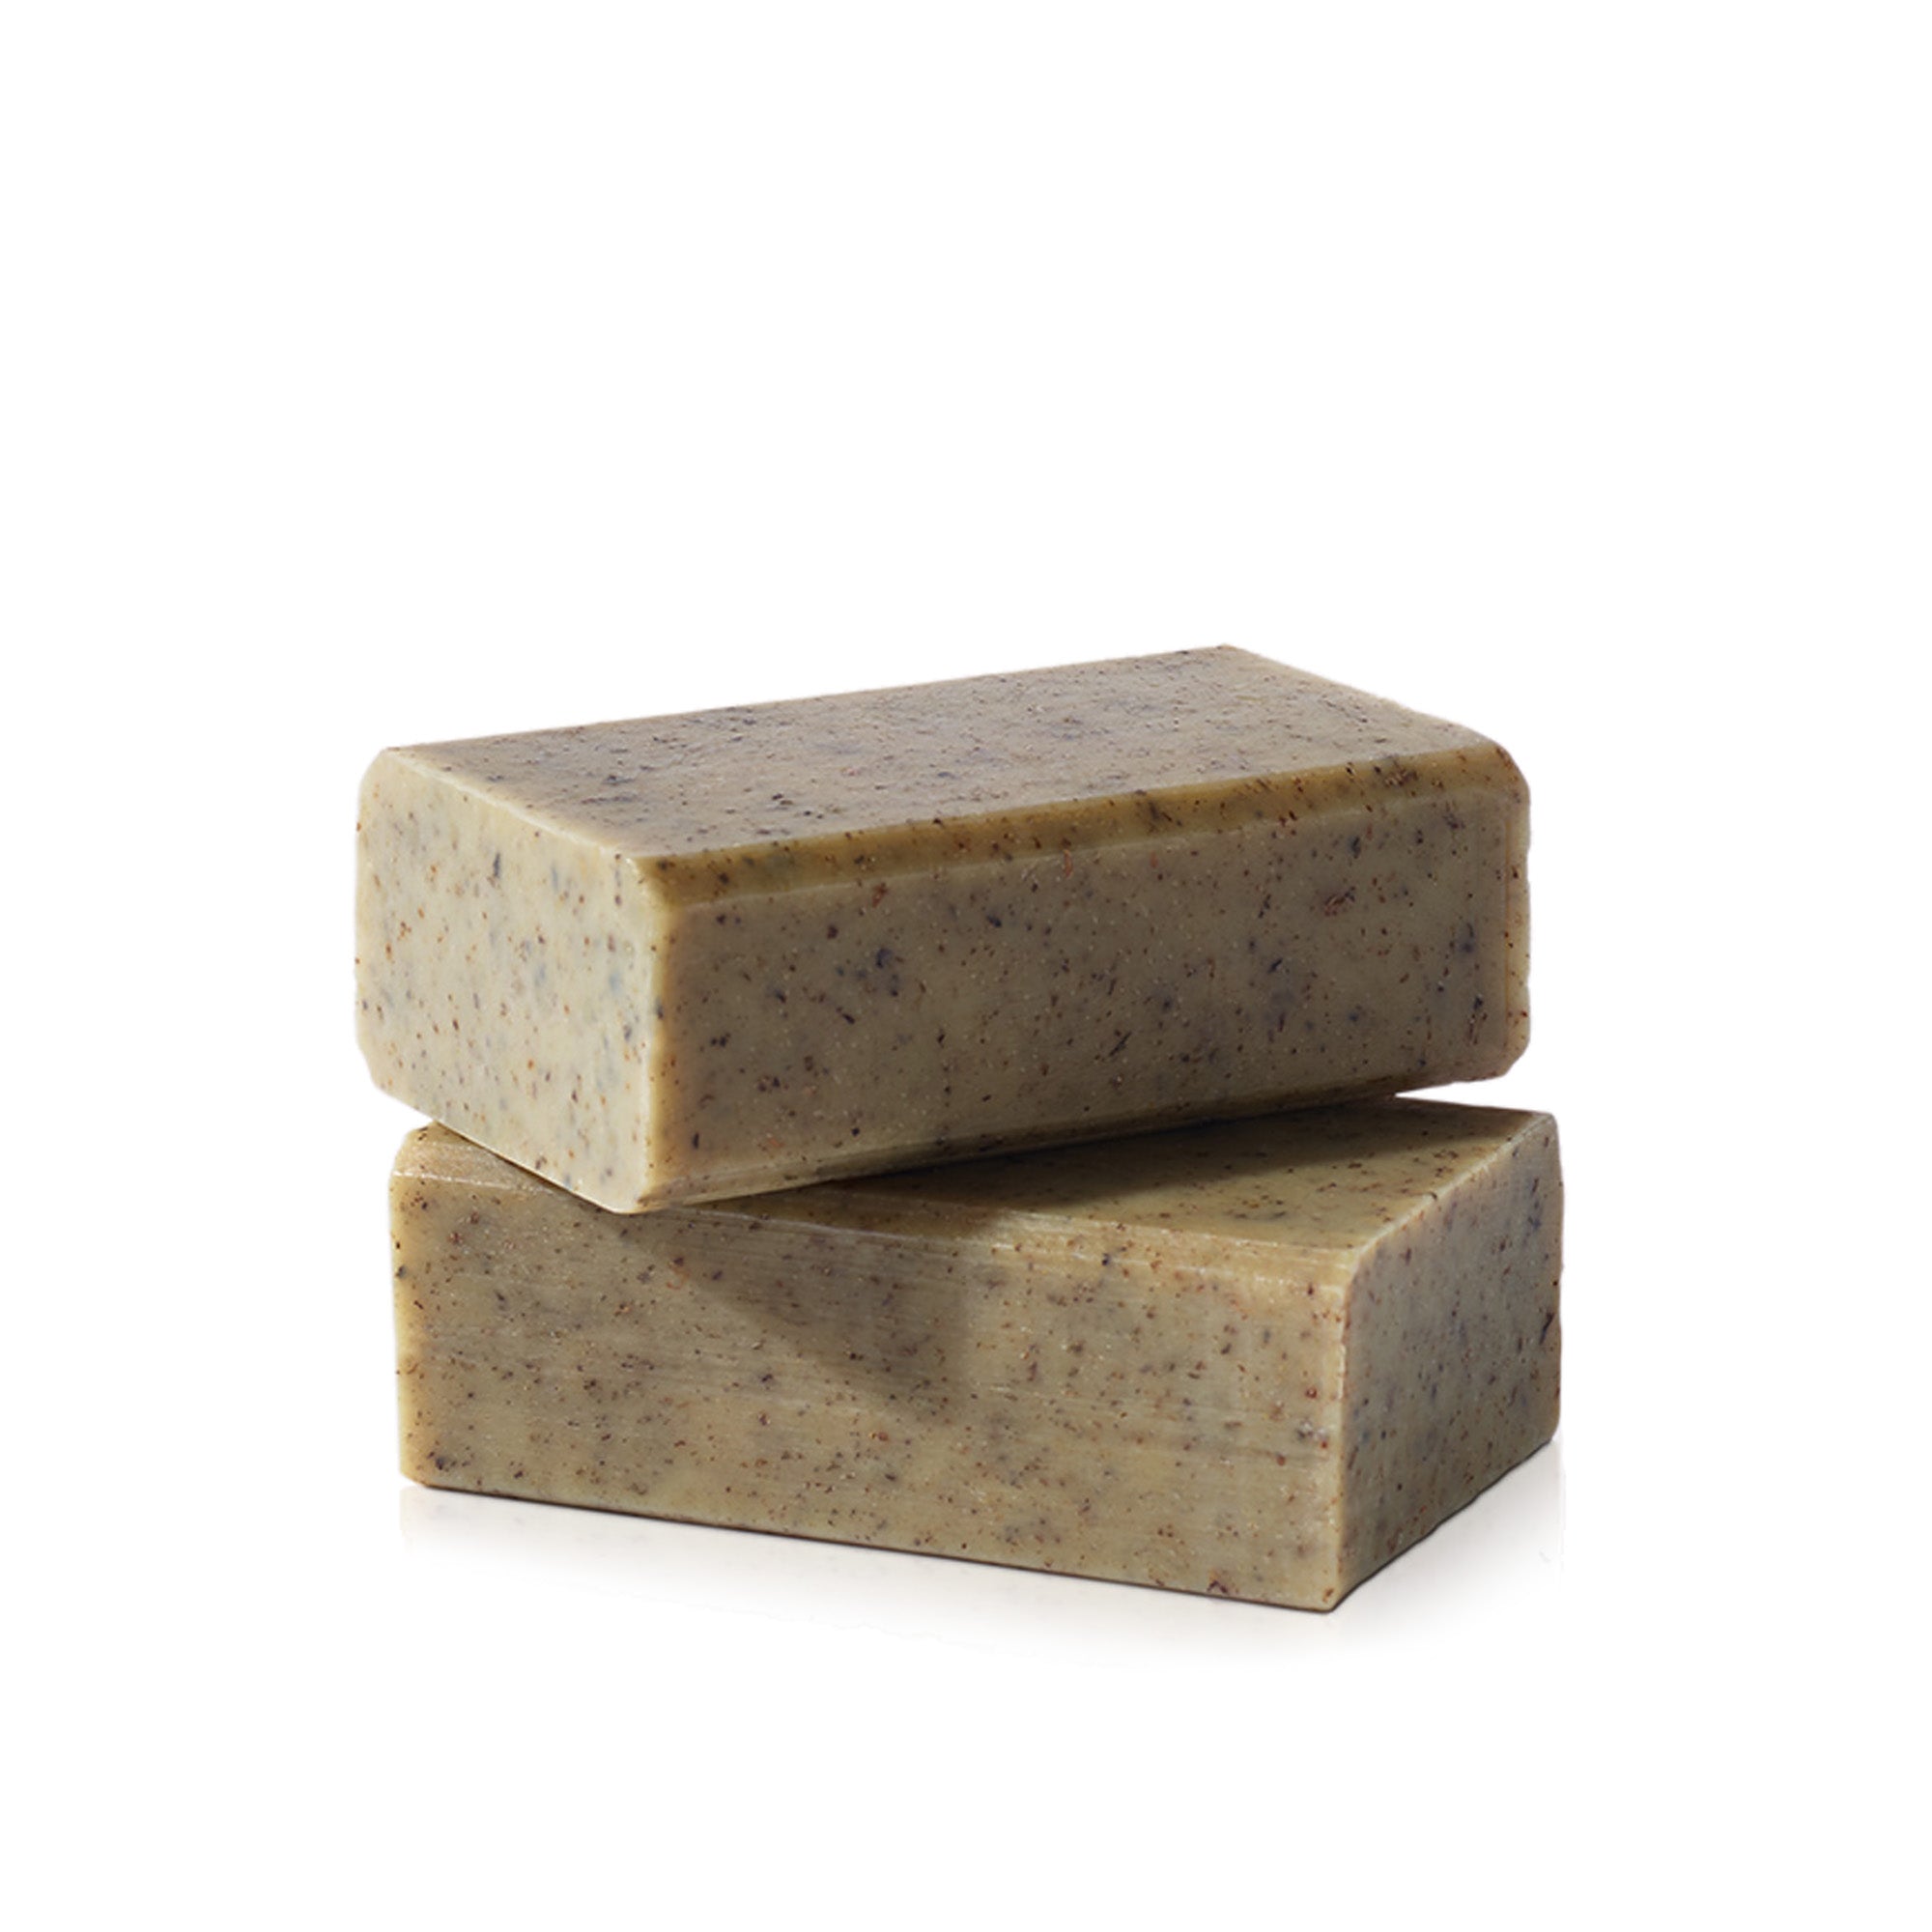 Image of Bia Balancing Soap bar sitting on top of another bar of soap.